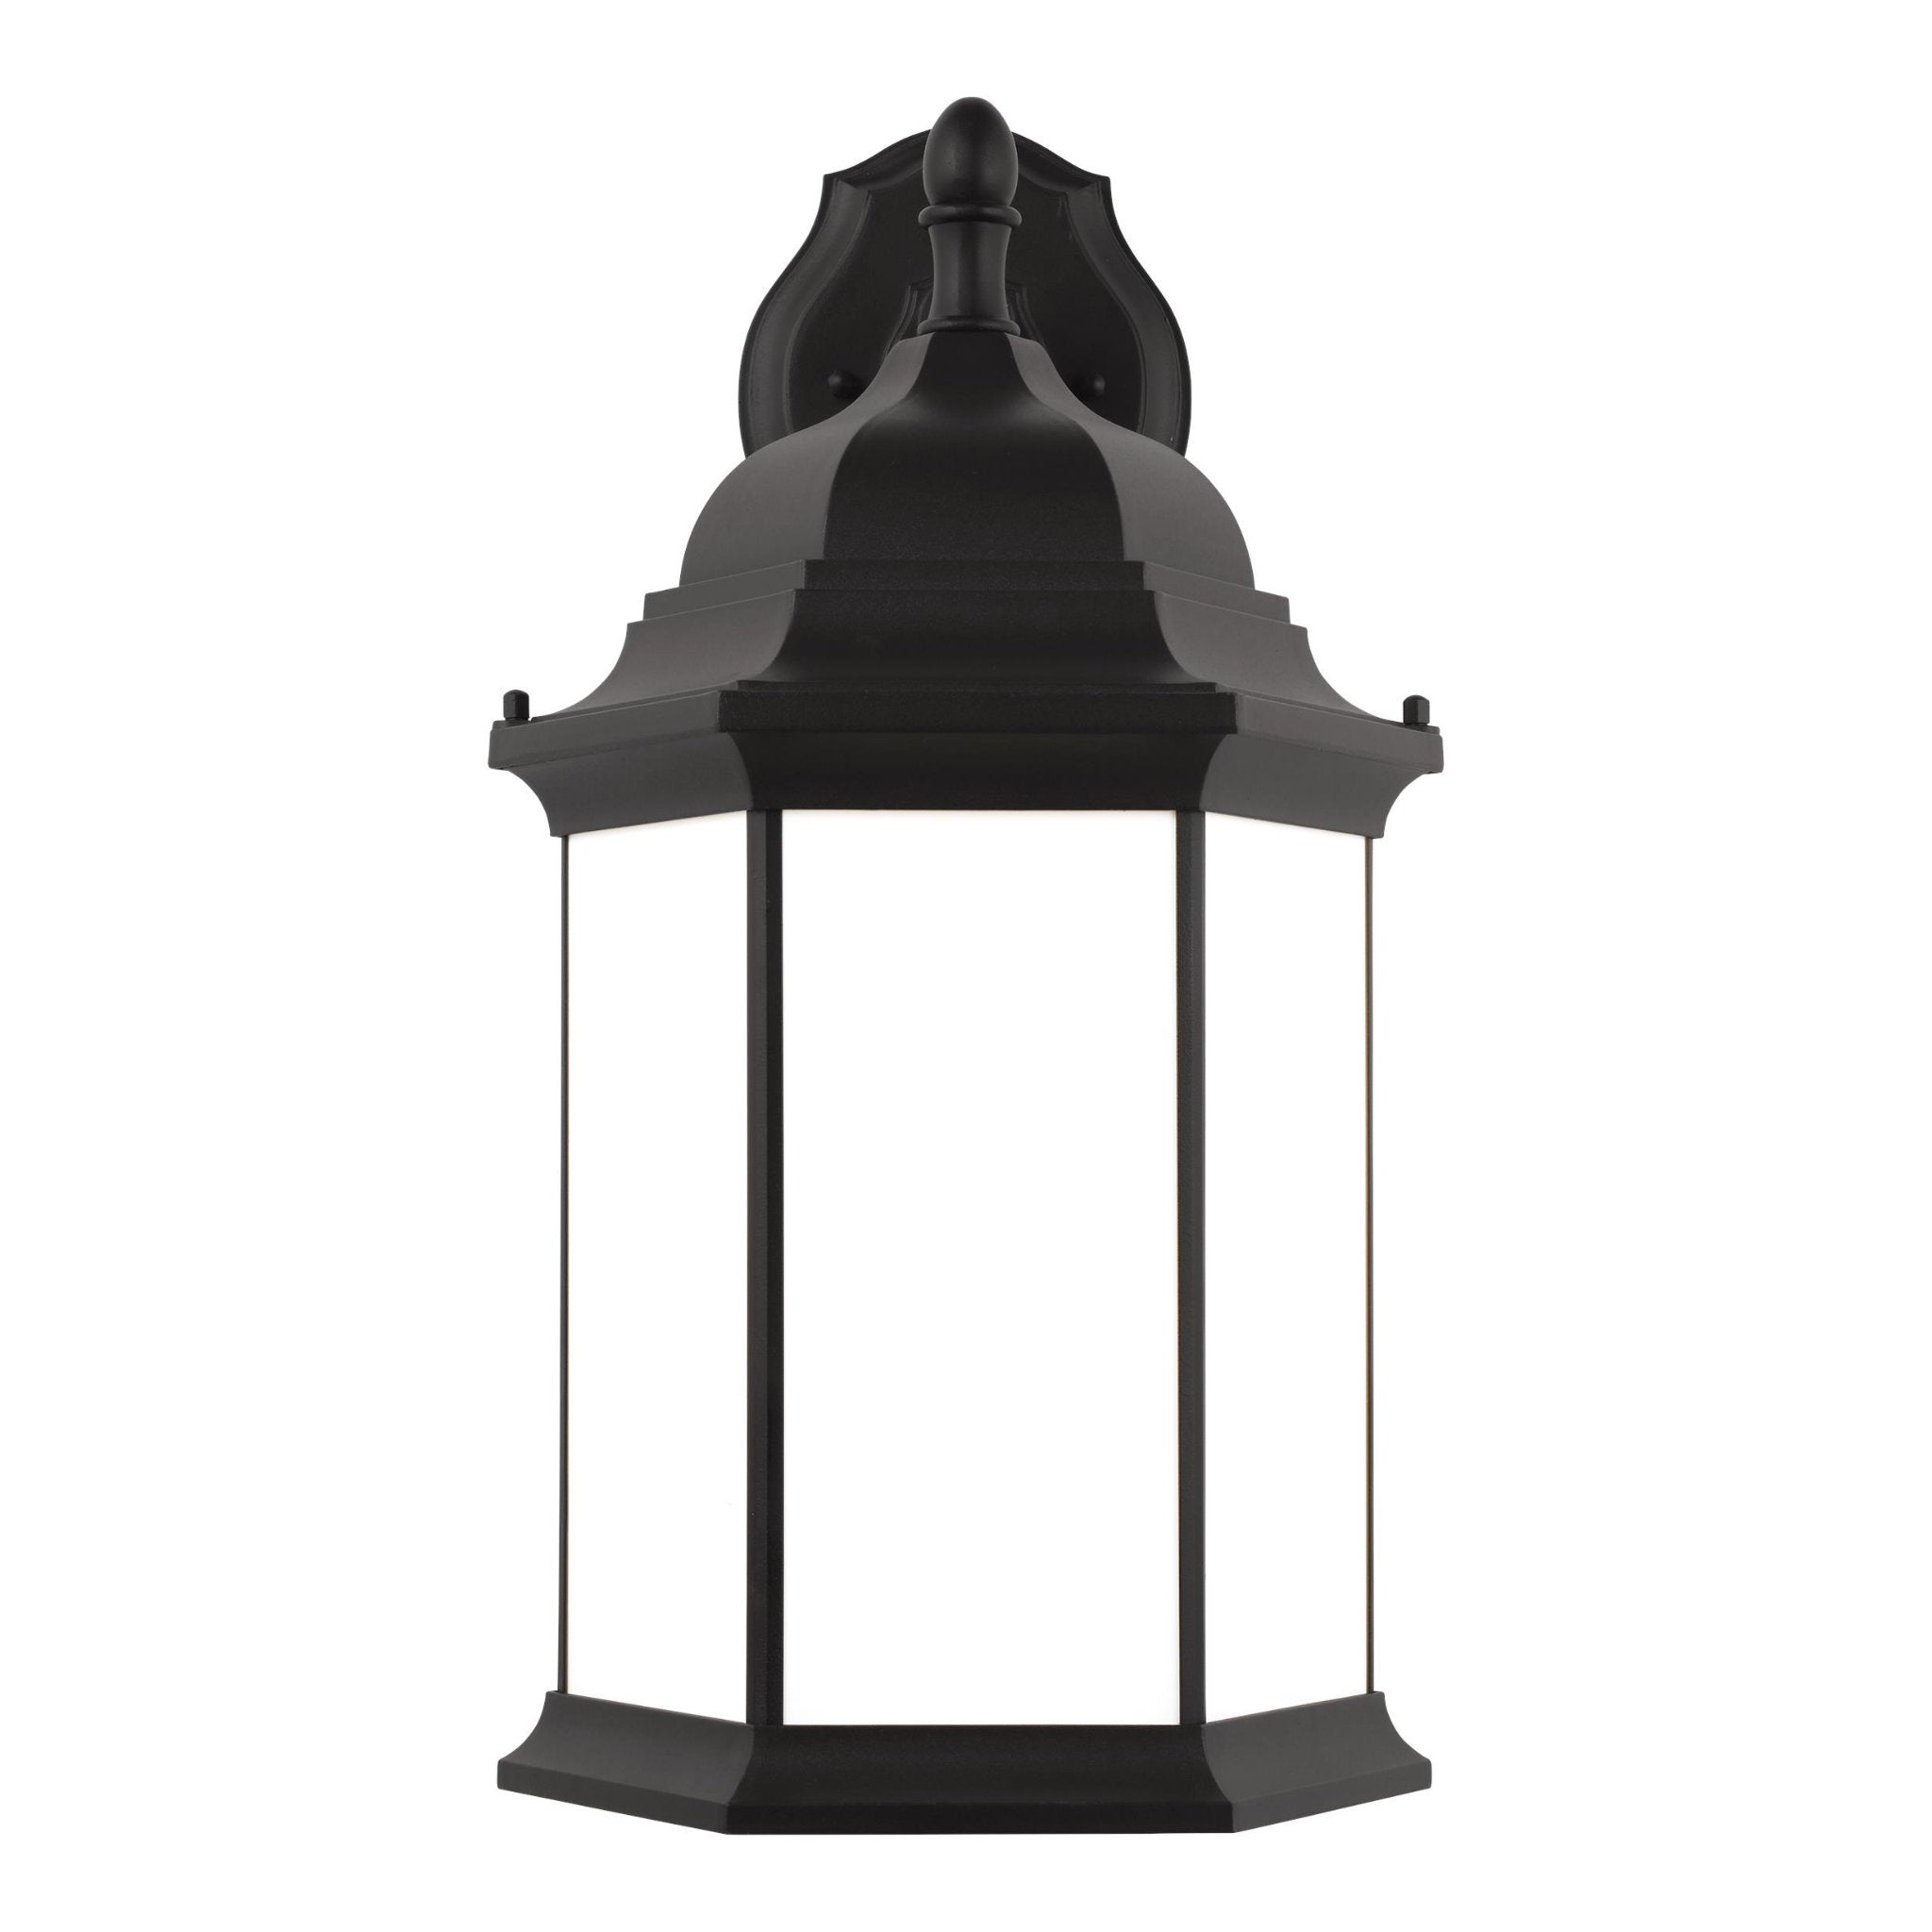 Sevier Extra Large One Light Downlight Outdoor Wall Lantern Traditional Fixture 12.5" Width 23.25" Height Die Cast Aluminum Rectangular Satin Etched Shade in Black